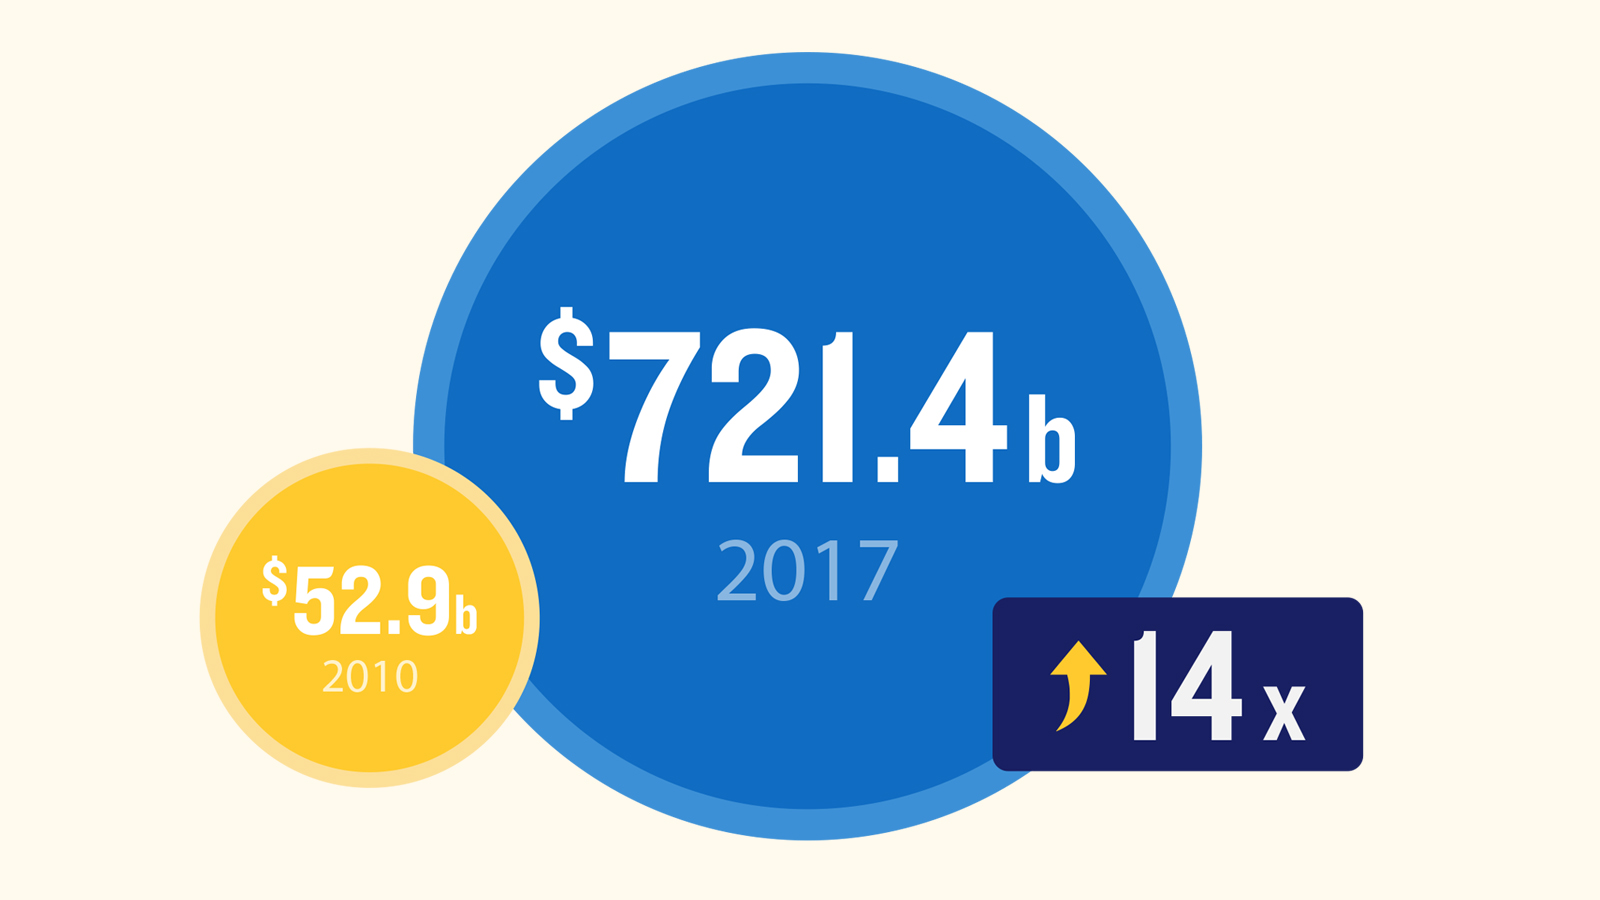 Illustration showing $52.9 billion mobile device global transactions from 2010 and a projected 2017 transaction total of $721.4 billion.